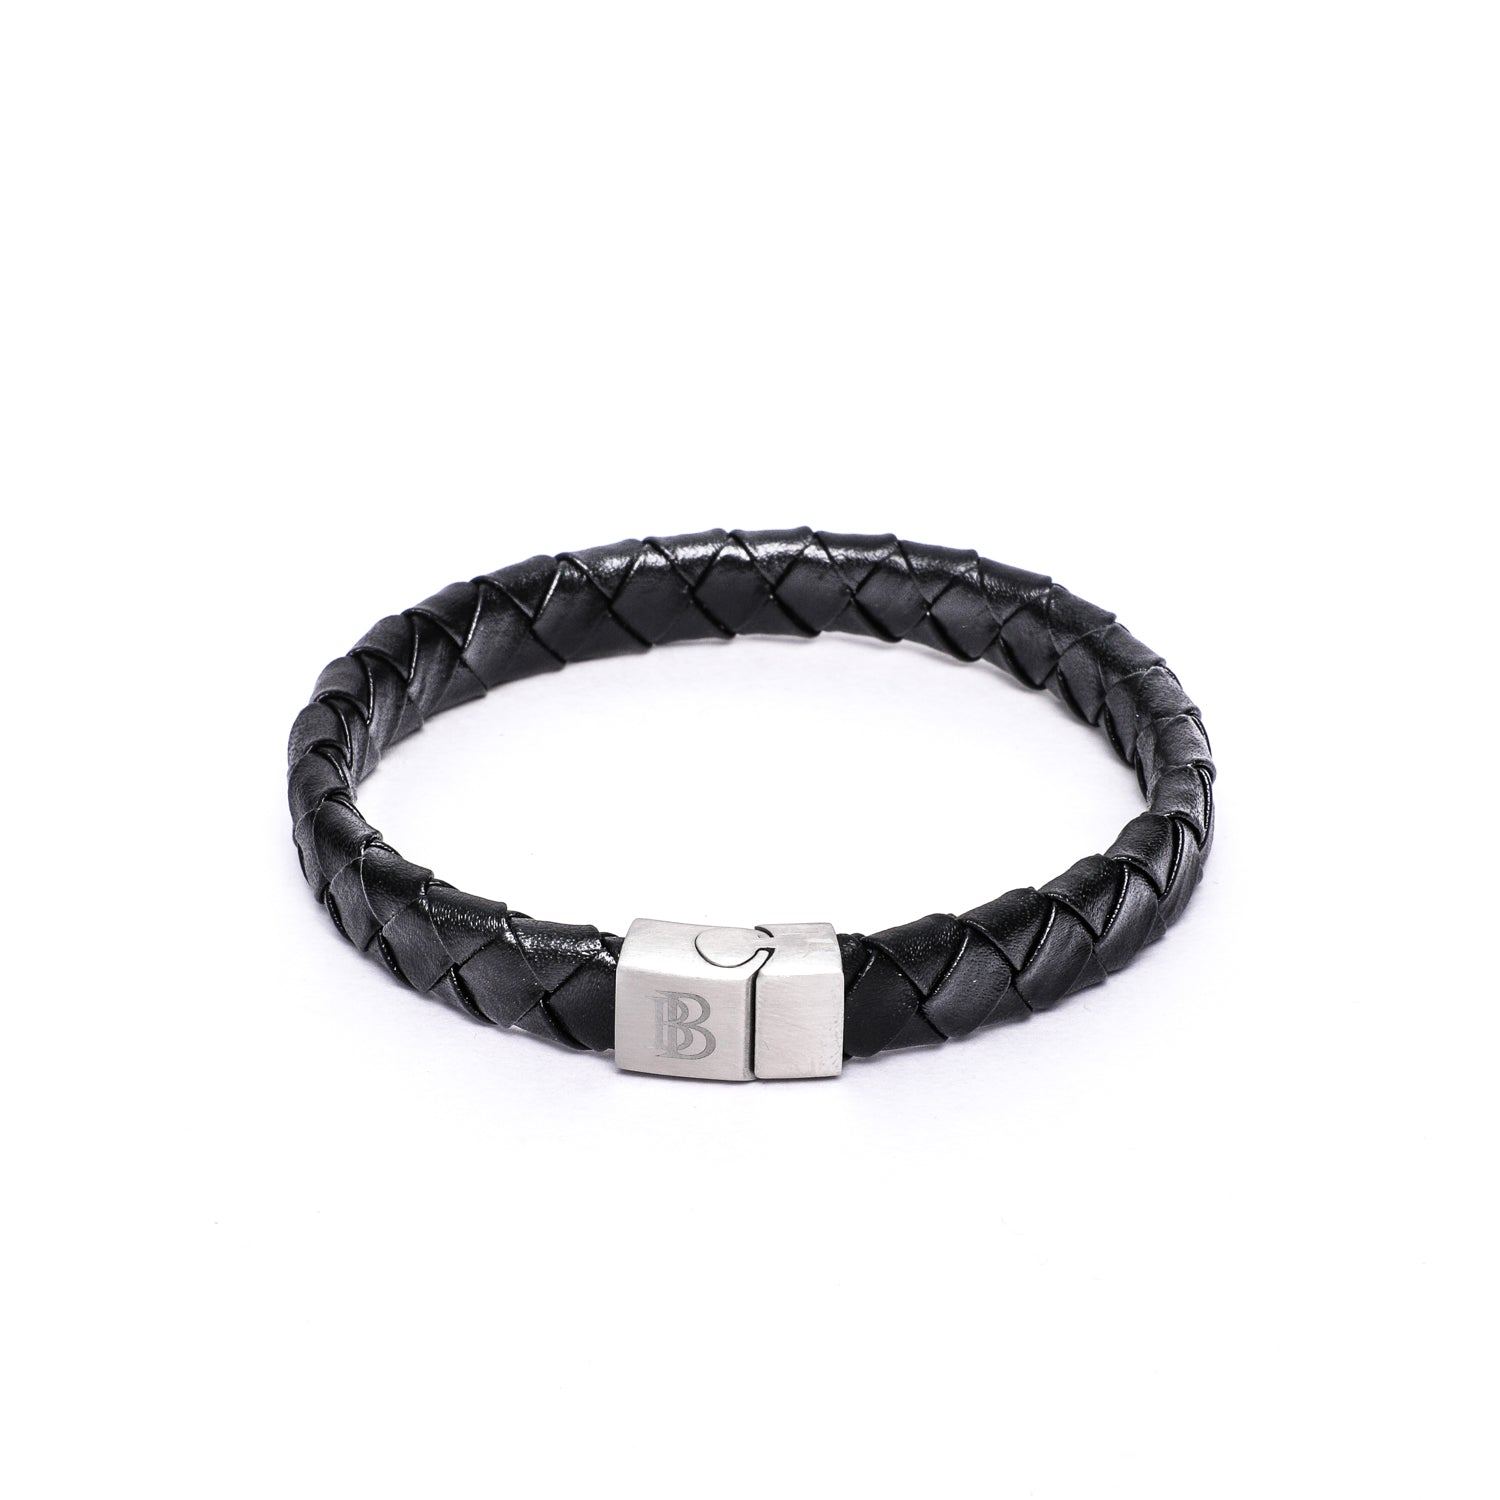 12x6mm Broad Weave Black Flat Leather Bracelet with Magnetic Clasp